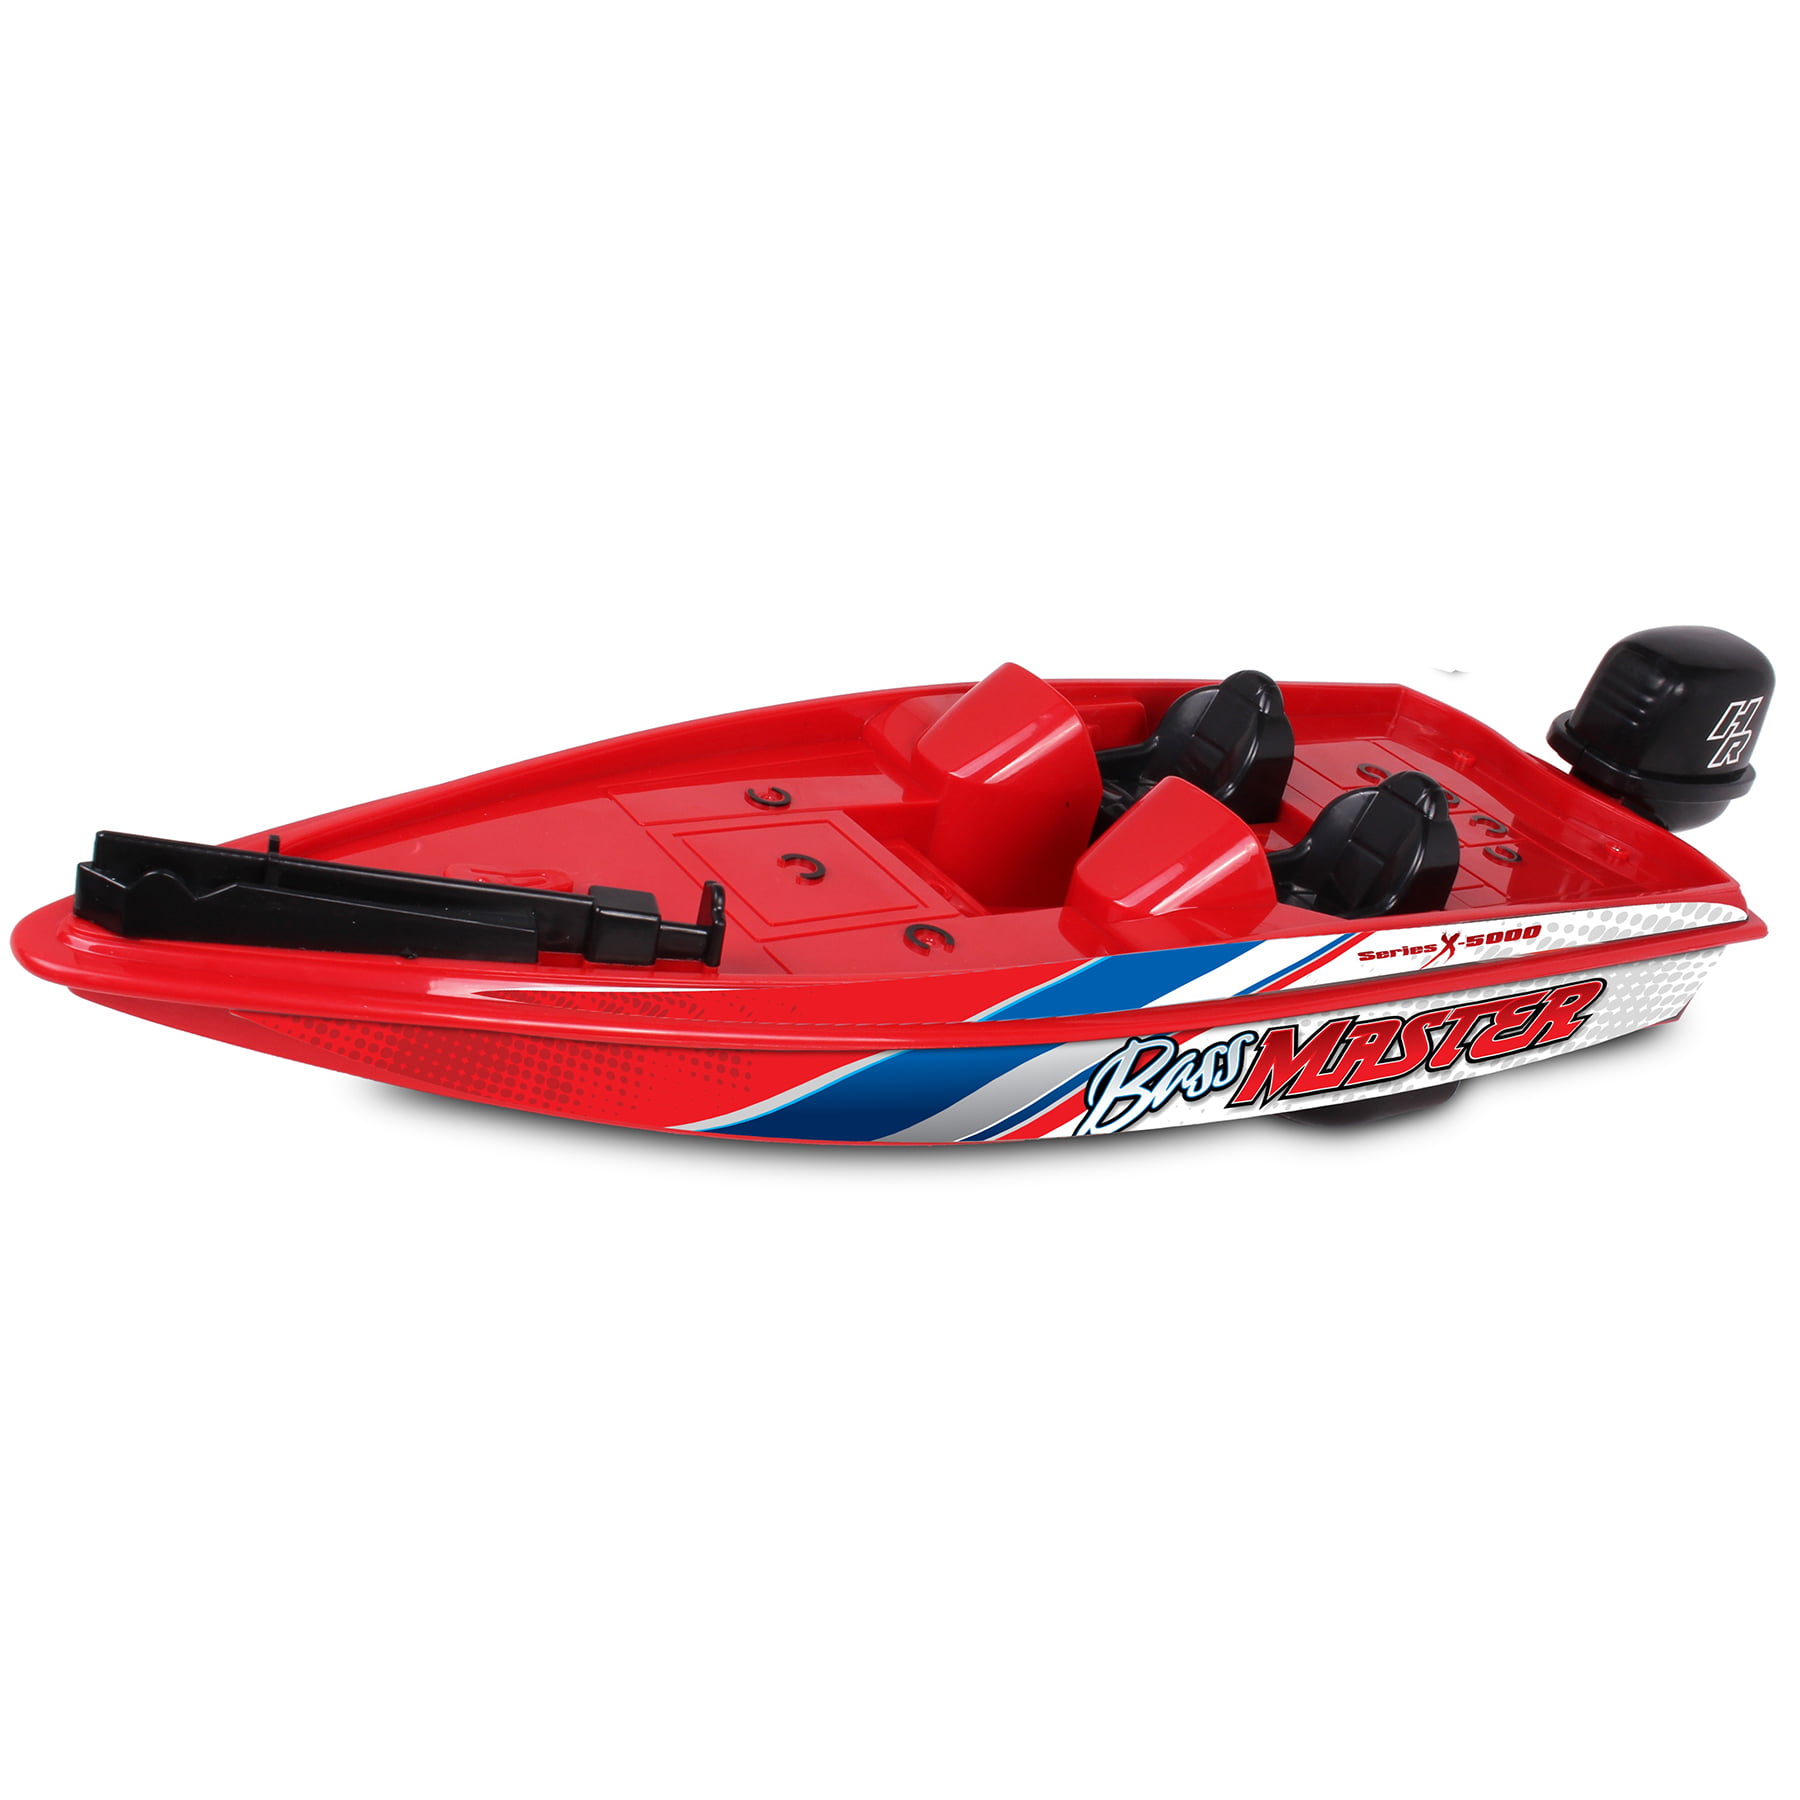 NKOK HydroRacers BassMaster RC Boat - Red 